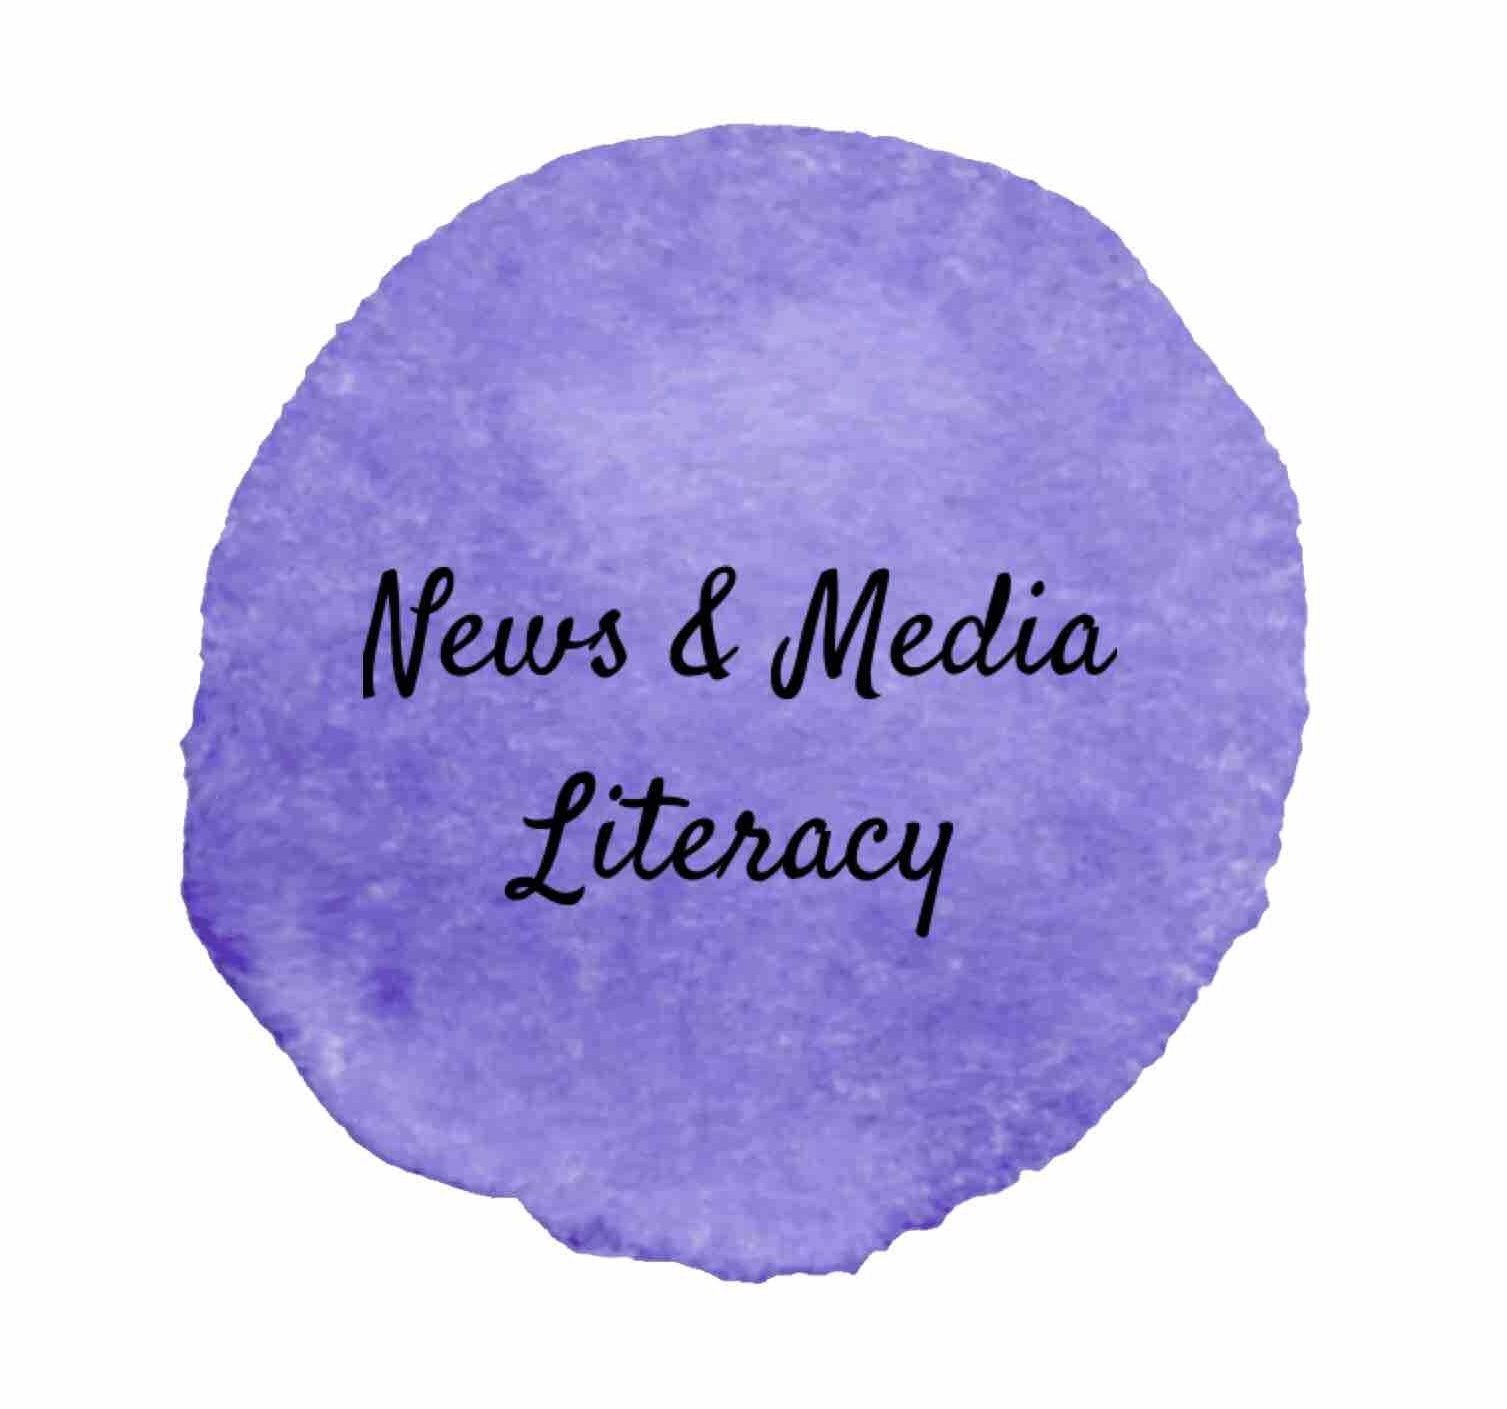 Dig Cit News and Media Literacy